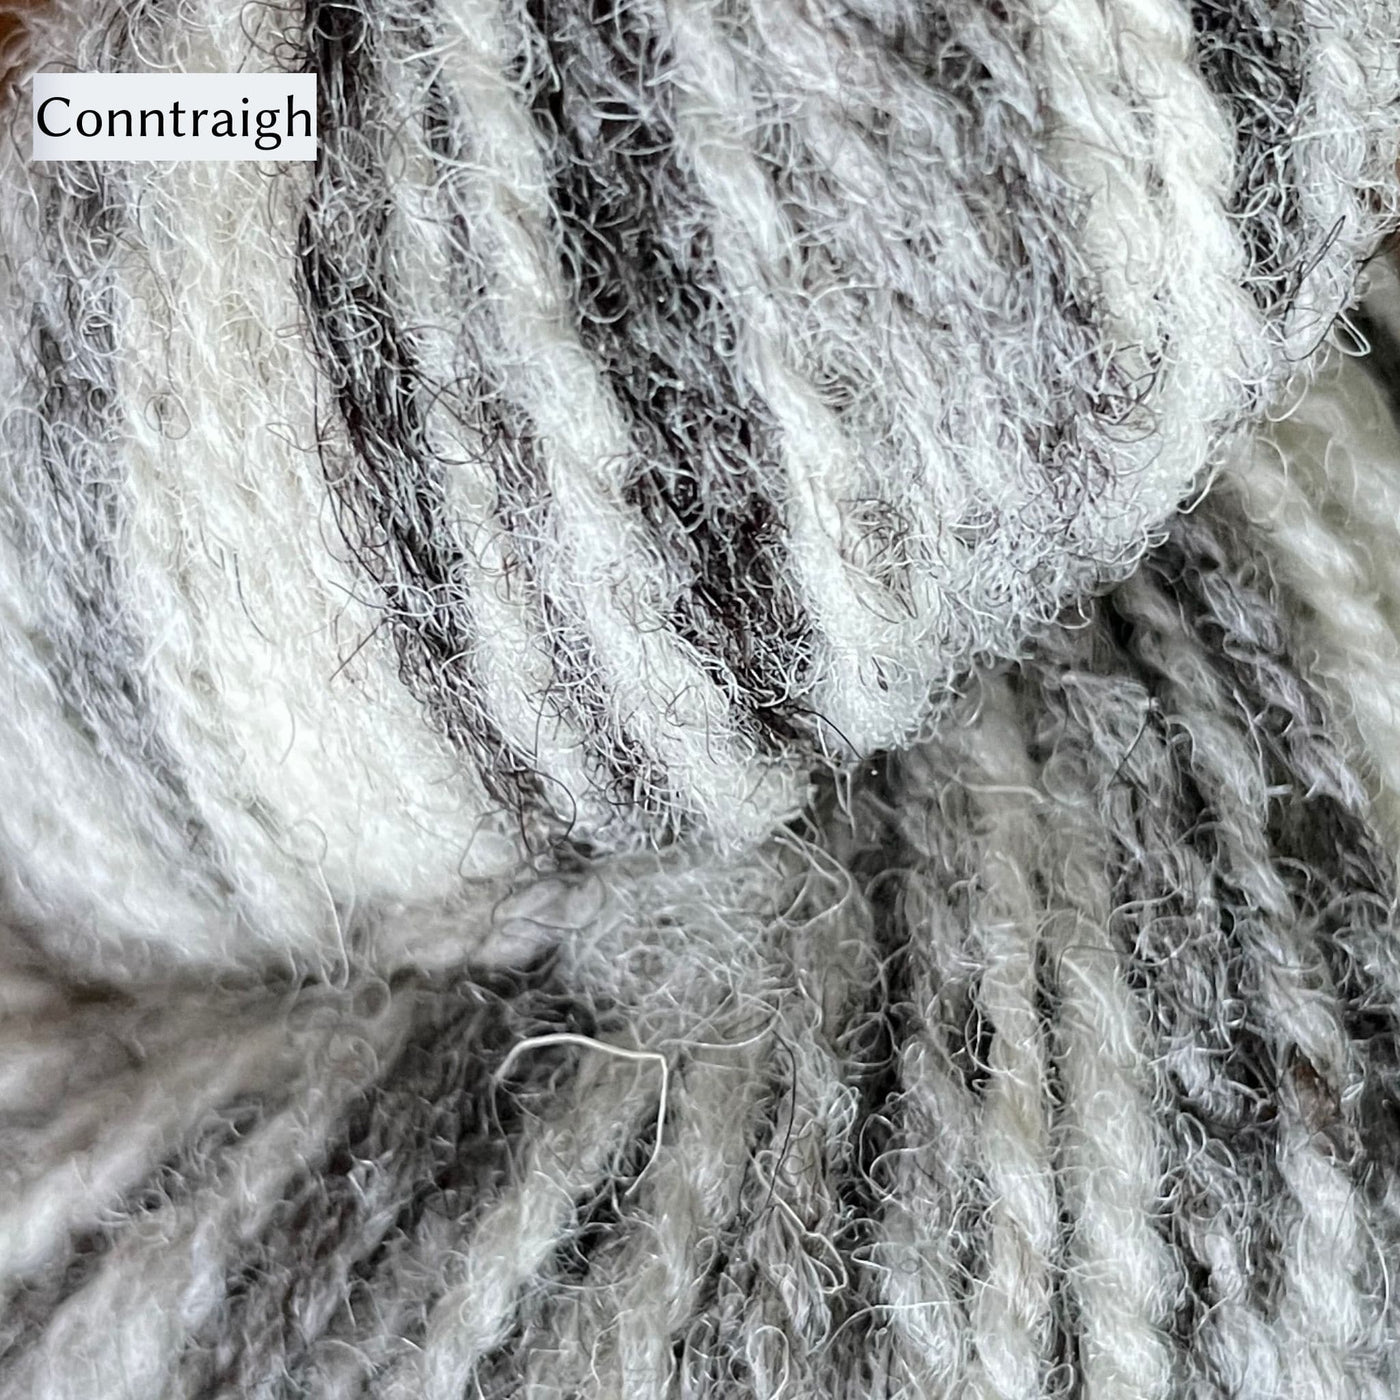 UIST Wool DK weight shown in Conntraigh color which is a variegated yarn cream to grey colors.